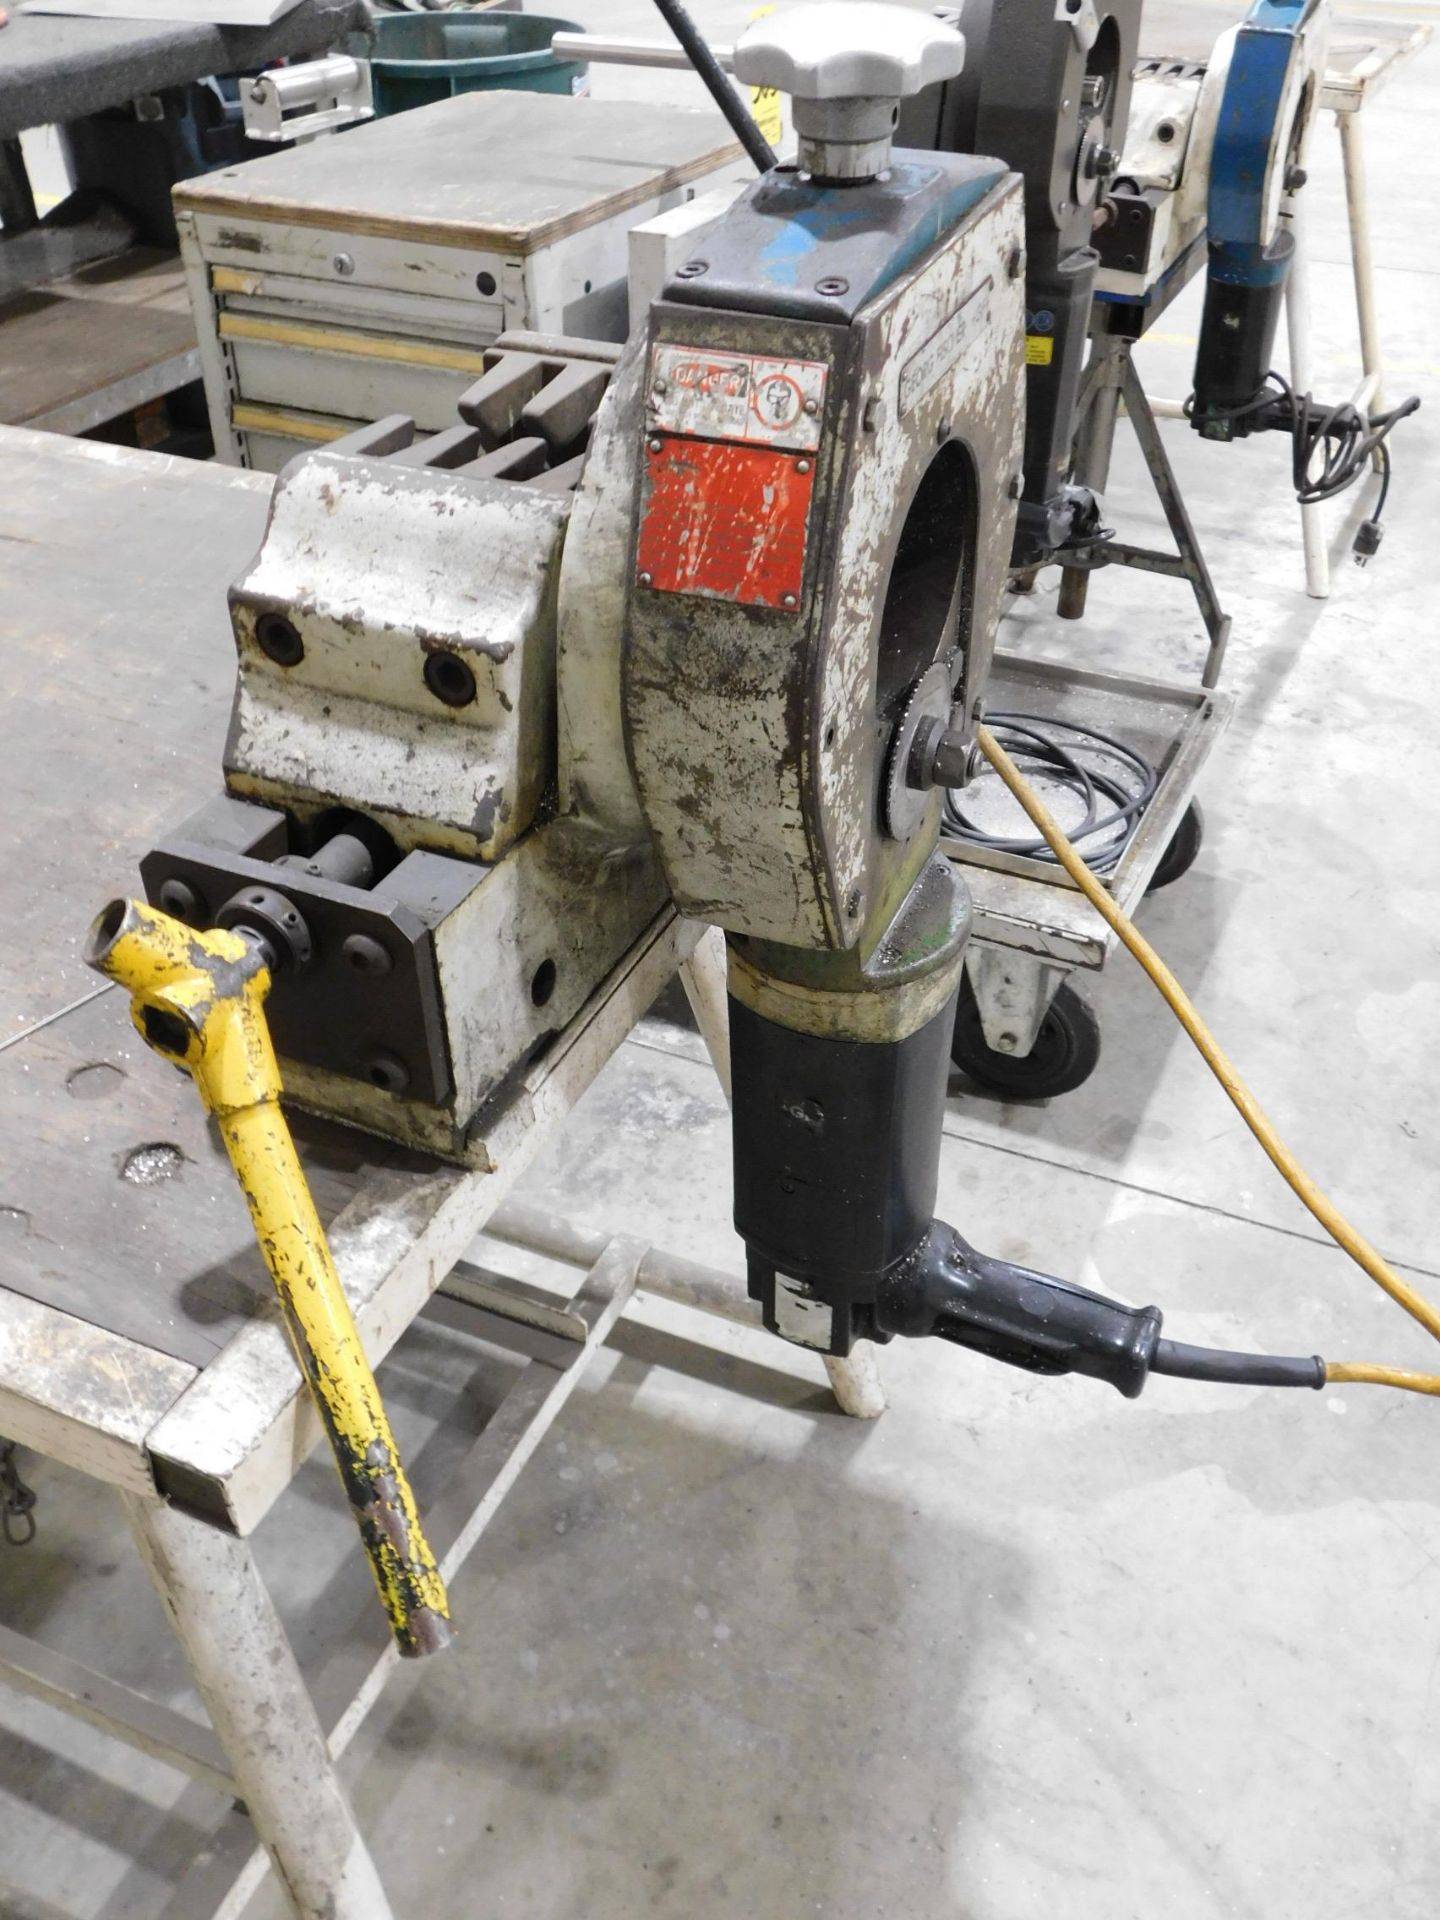 Georg Fischer Model RA4 Tubing Cut Off Saw, s/n 4696105, 1/2" - 4" Capacity, with Table, 110/1/604 - Image 3 of 6